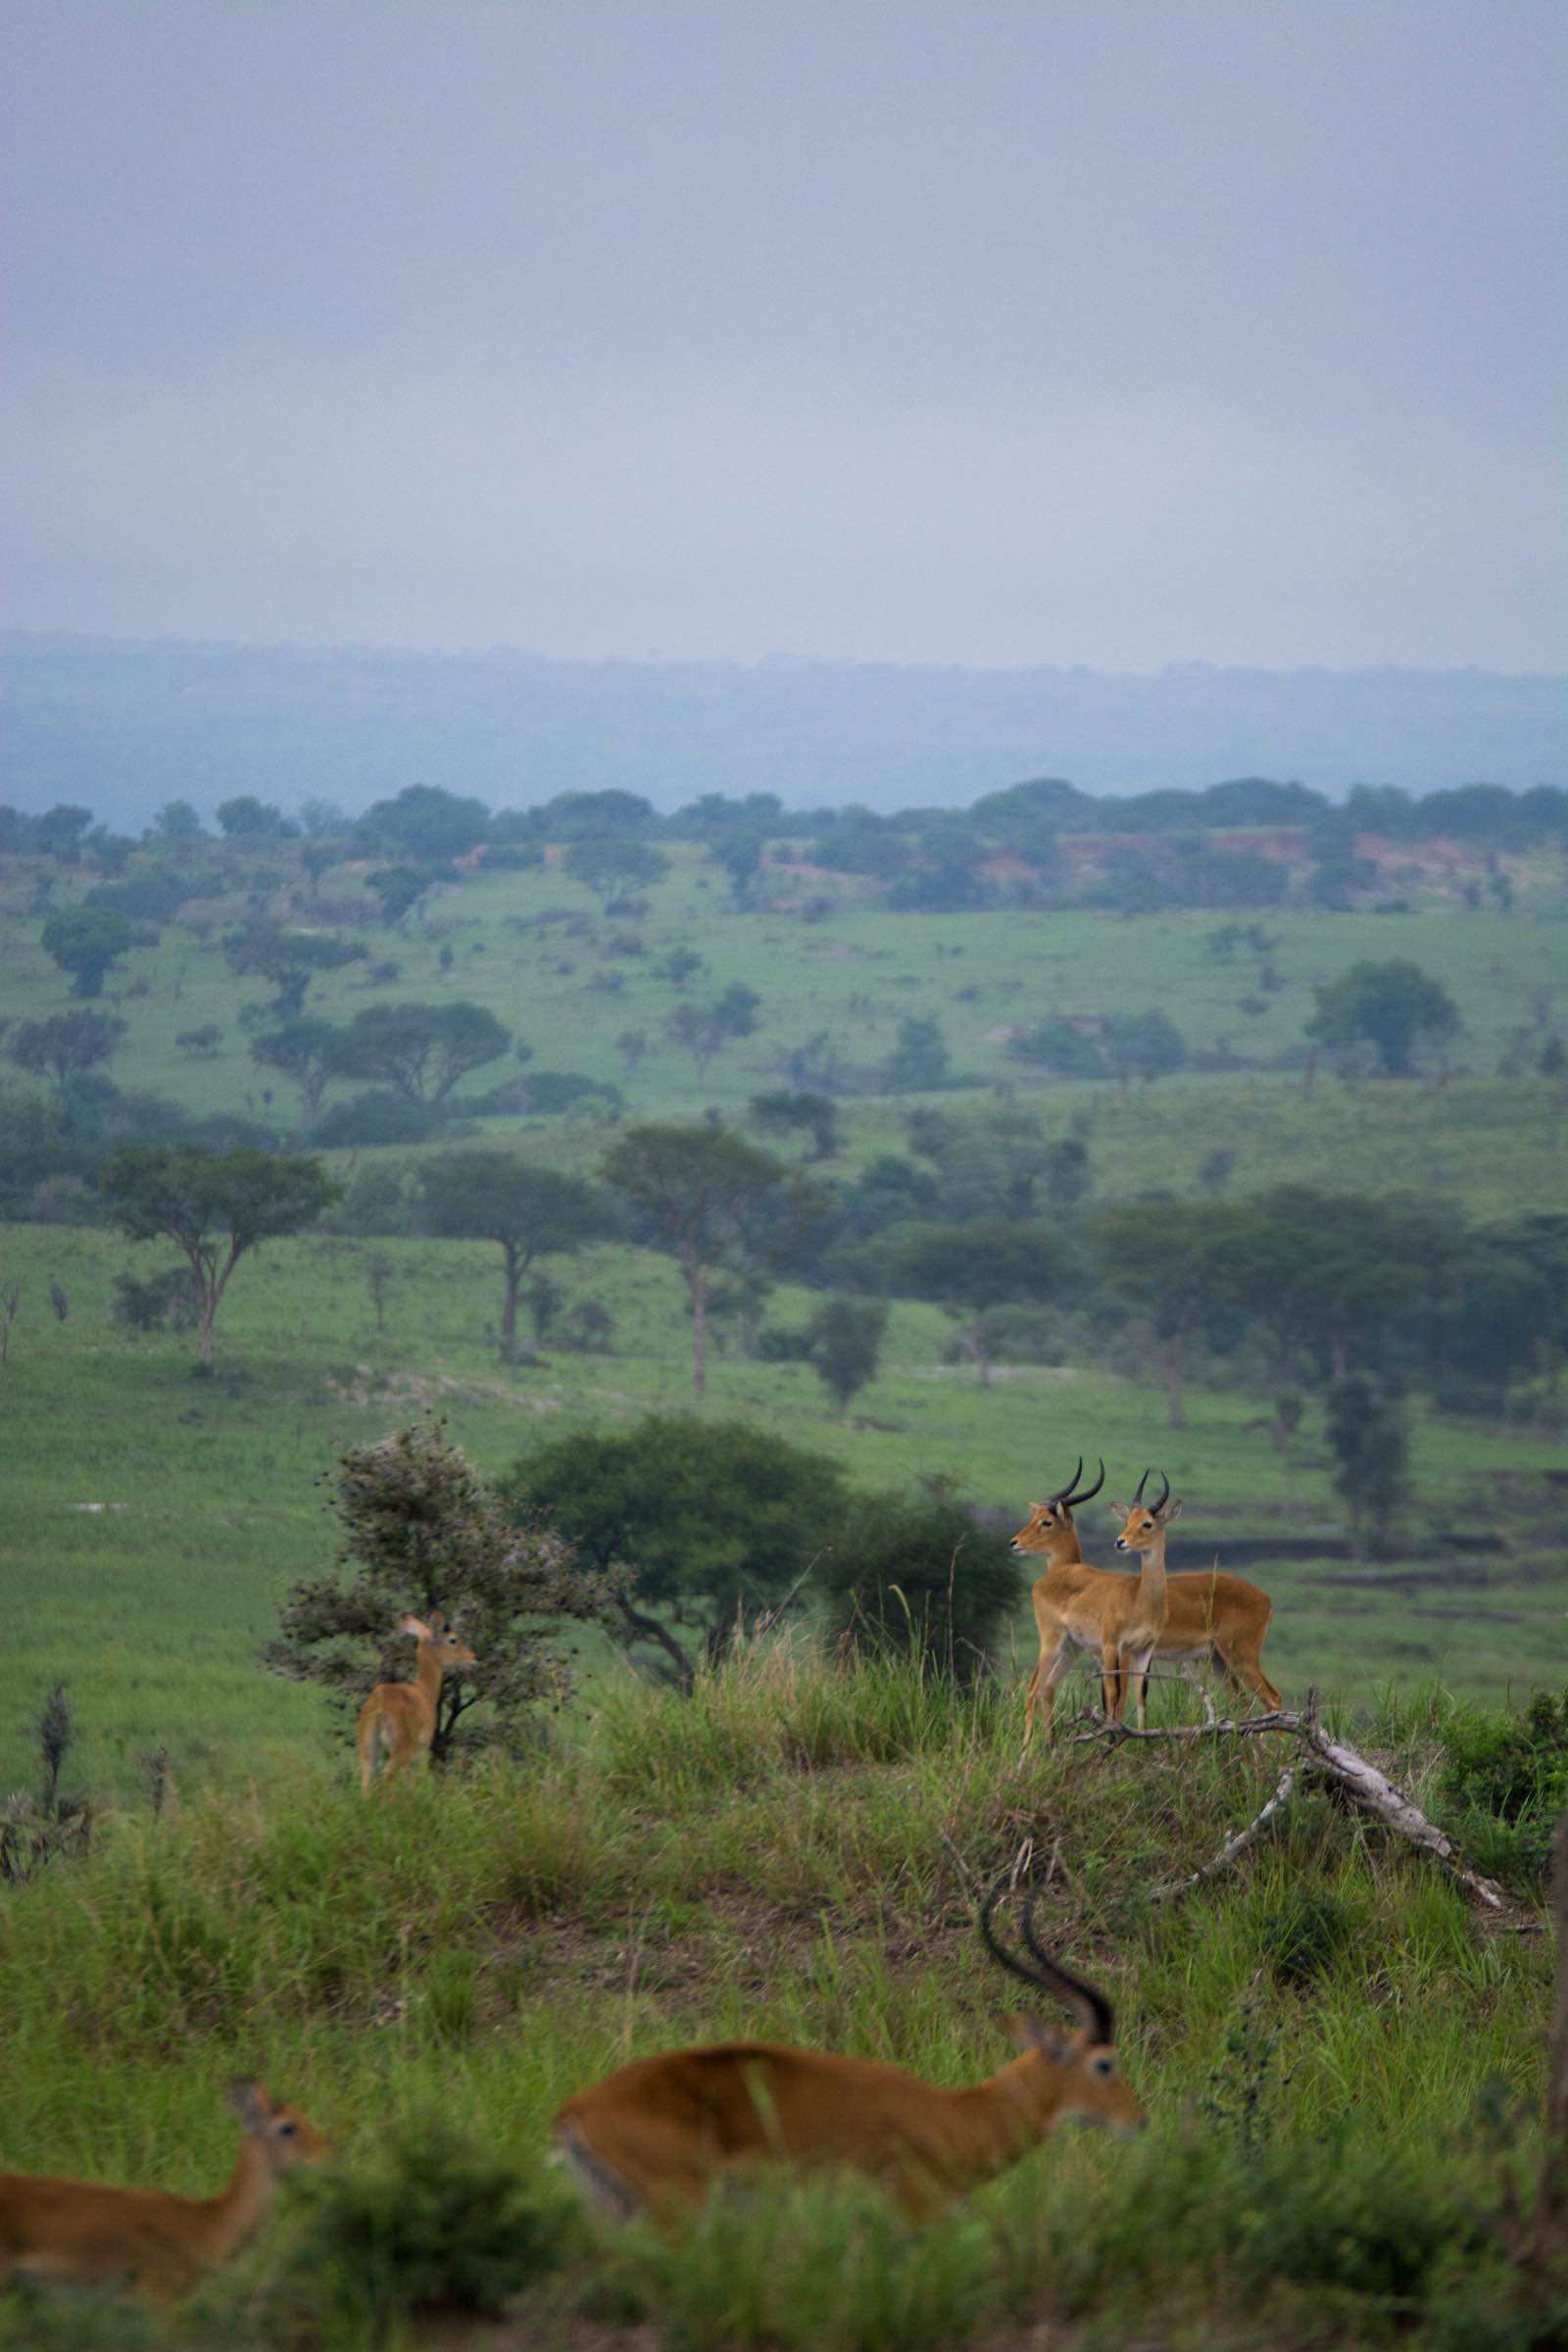 Incredible landscapes of Murchison Falls National Park with the iconic Ugandan kob on the lookout